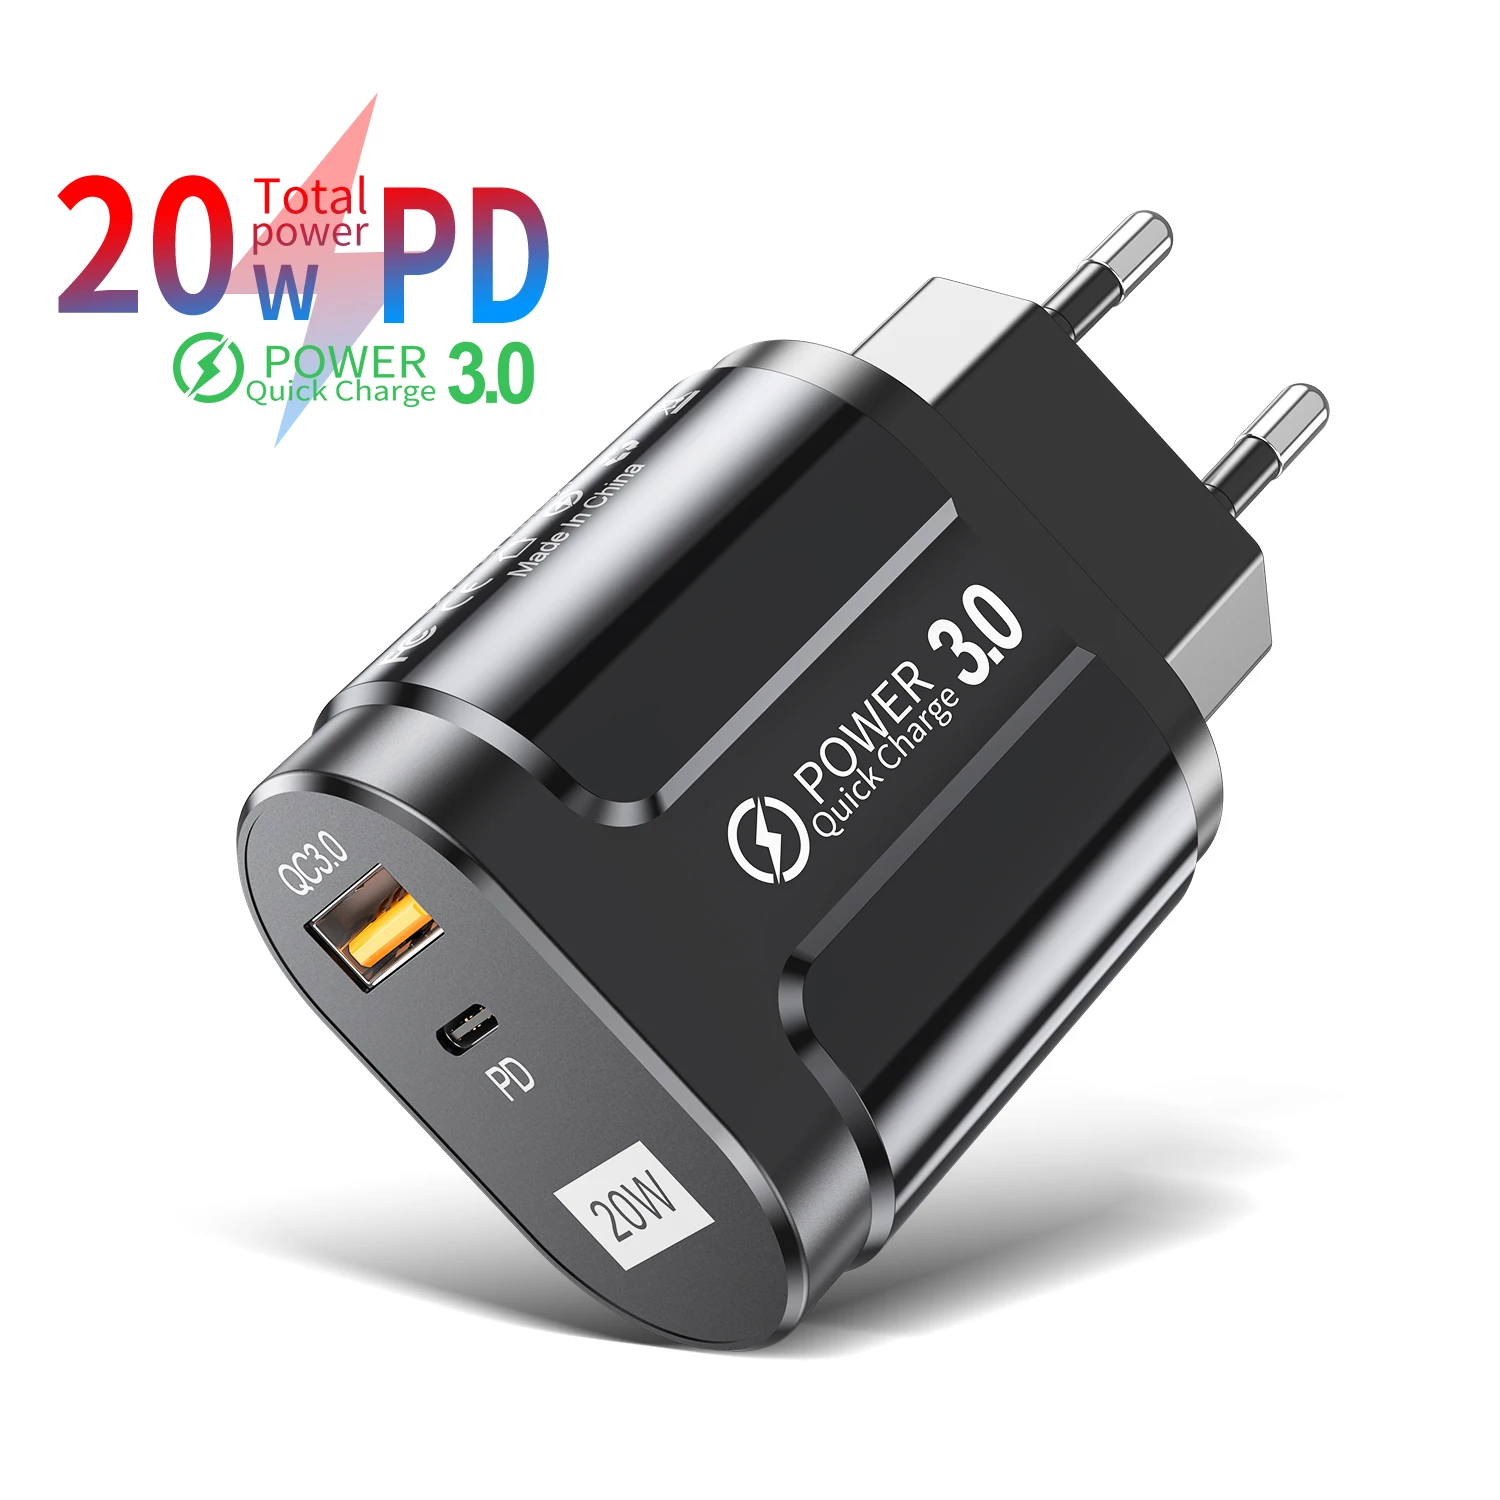 

USLION 2021 Amazon Hot Sell 20W PD Charger Type C USB QC 3.0 Dual Ports Wall Chargers Phone Charger EU US UK for iPhone 12, Black white